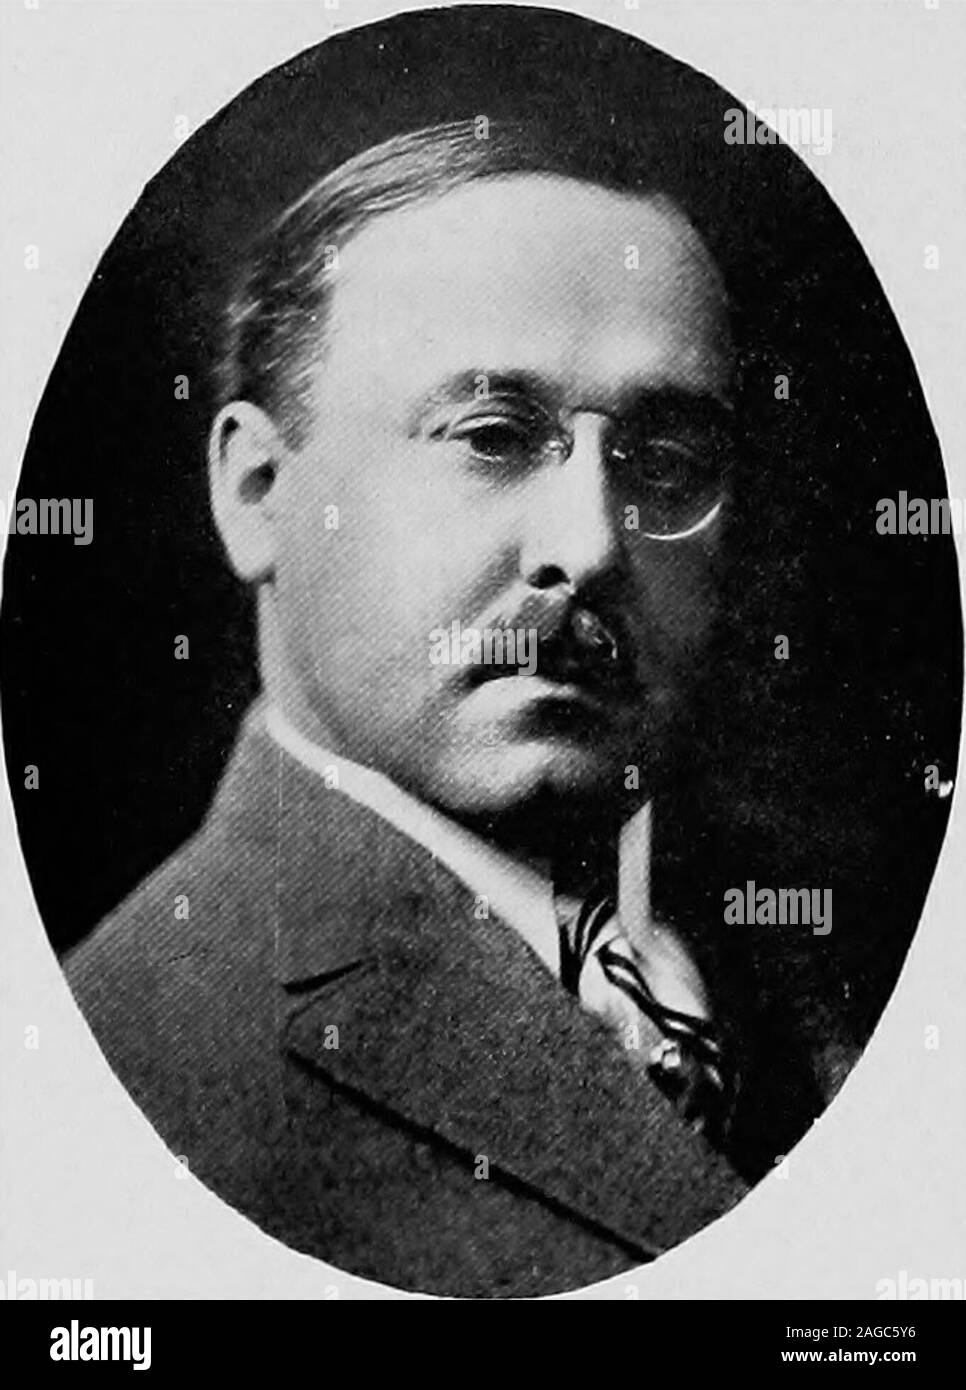 . Empire state notables, 1914. .lOHN H. LIVINGSTON, JR. President the Town and County Home Land Bureau and Manager of the Real Estate Department of Town and County New York City ALFRED E. F. McCORRY Real Estate, Factory Site Specialist New York-City 612 Empire State Notablesreal estate. LEWIS H. MAY Treasurer Lewis H. May Co., Director National Bank of Far Rocliaway, Treasujcr Edgmerc RcaHy Co. New York City Stock Photo